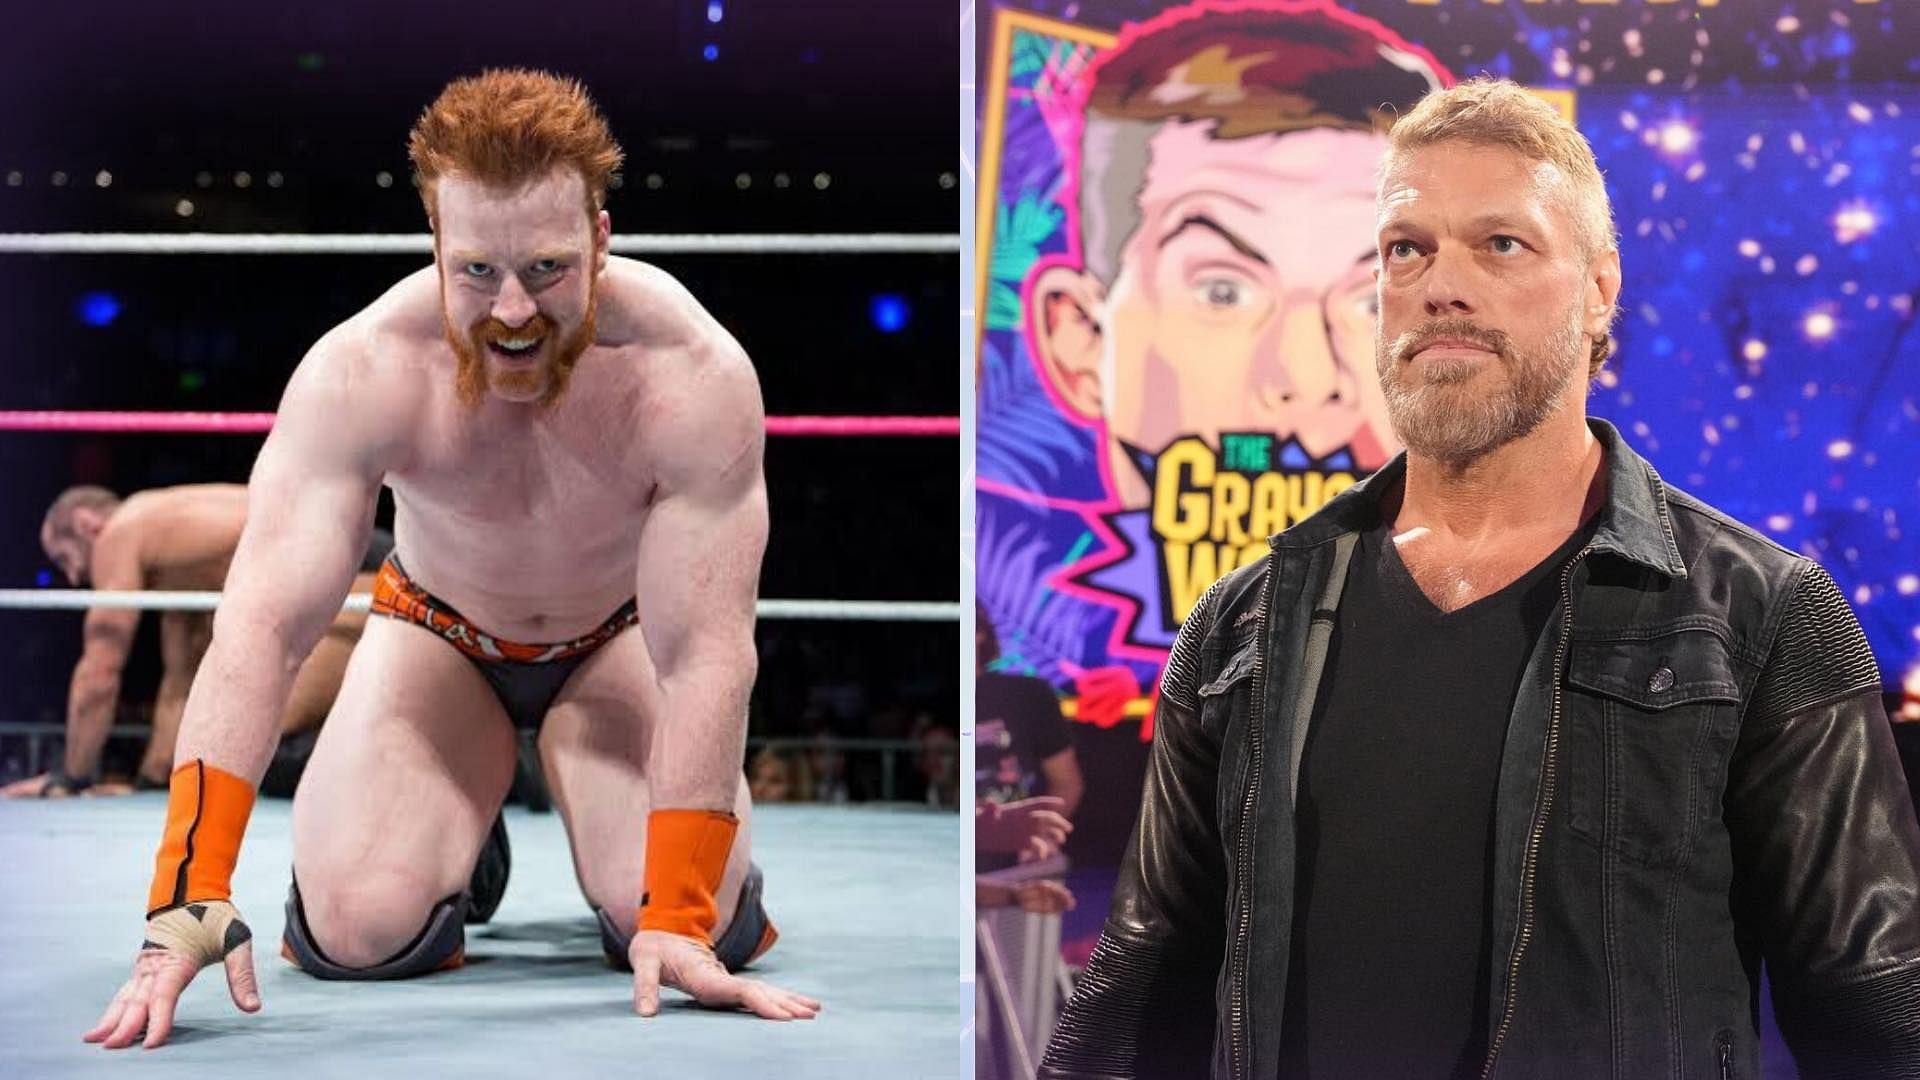 Sheamus and Edge are set to clash on WWE SmackDown next week